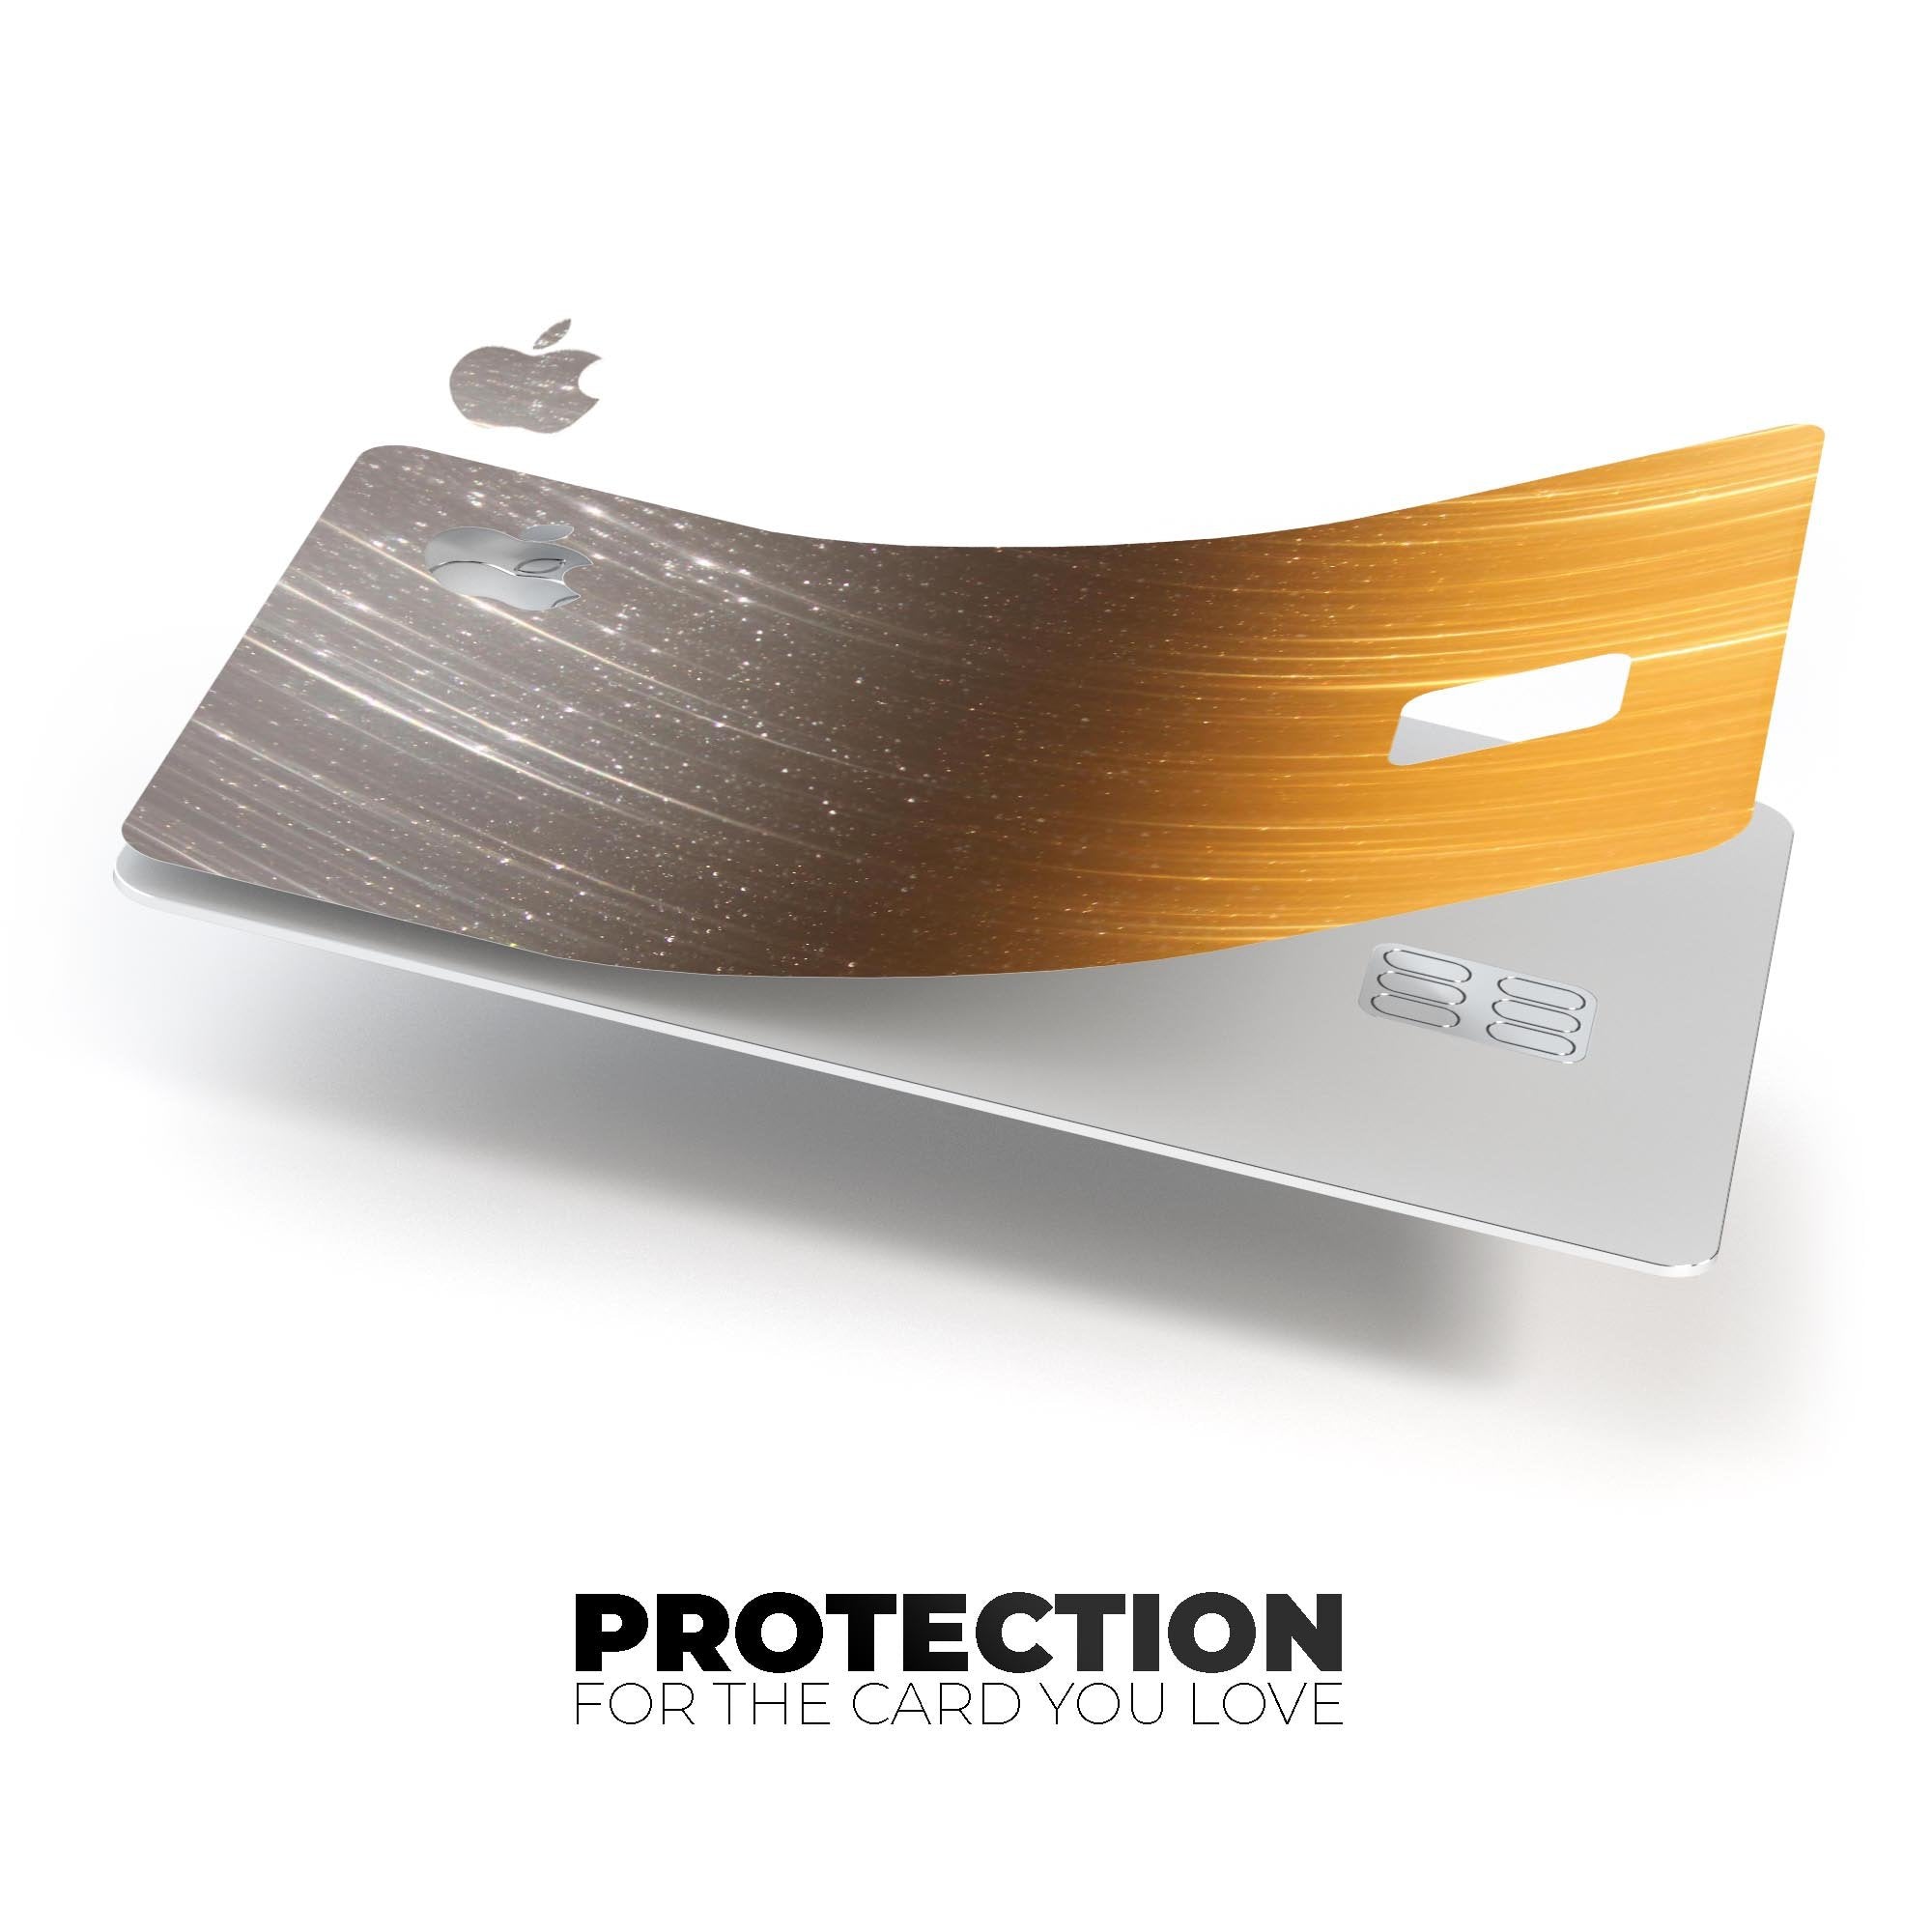 Scratched Gold and Silver Surface Premium Protective Decal